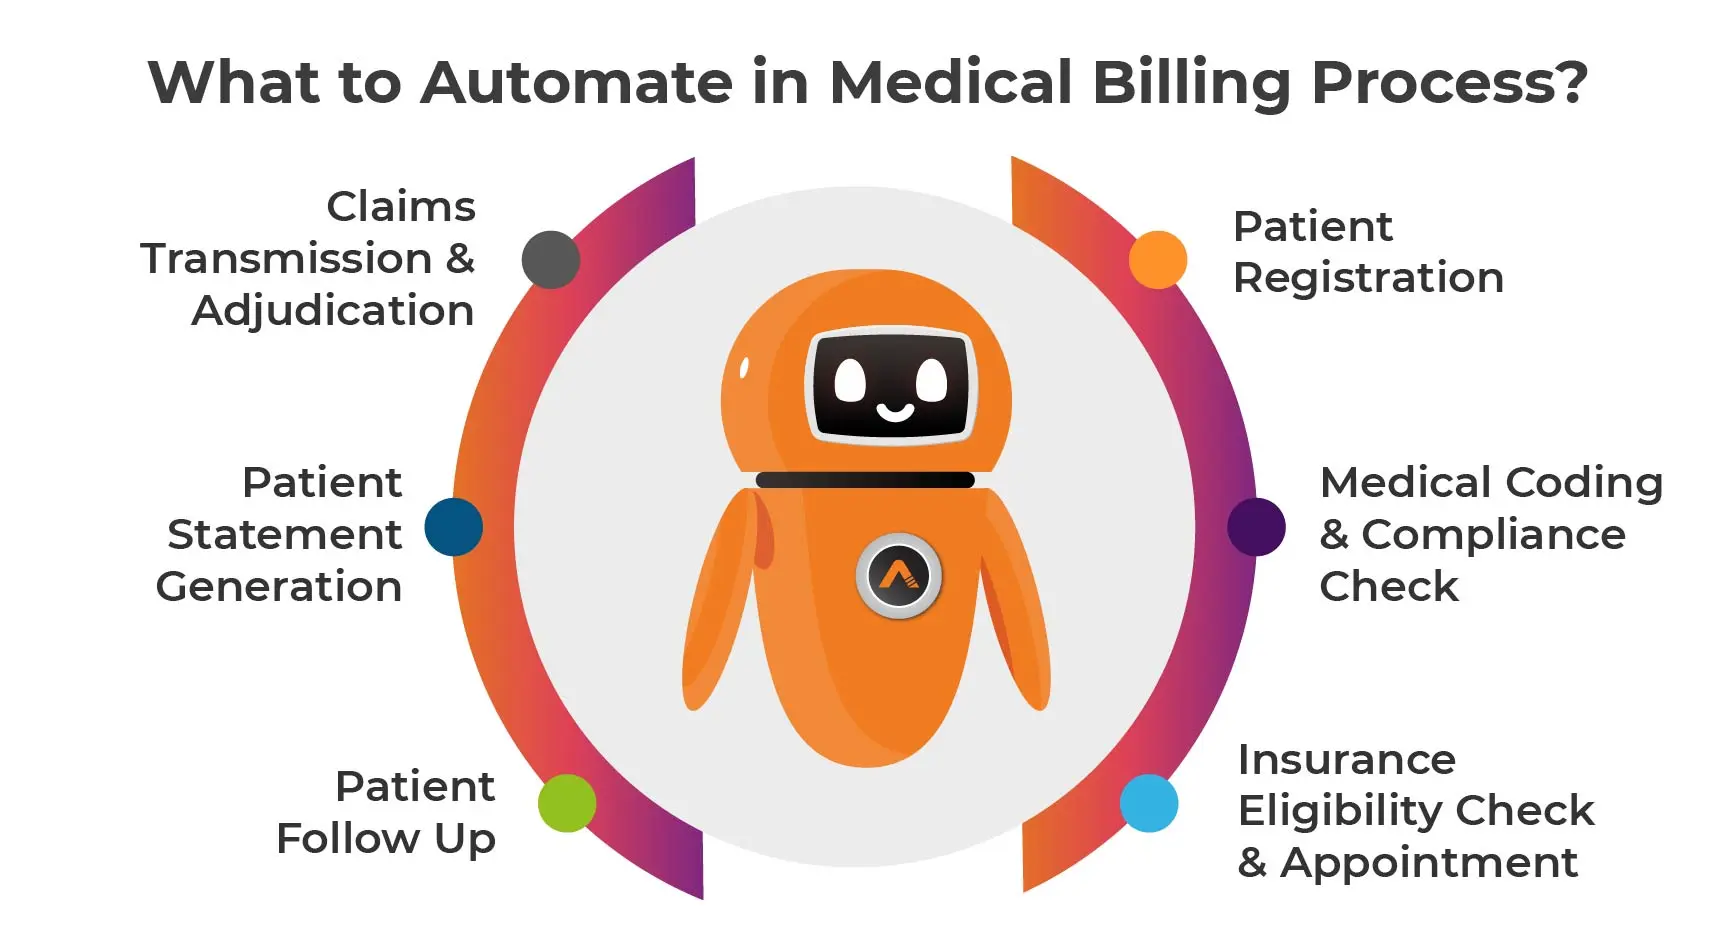 What to Automate in Medical Billing Process?